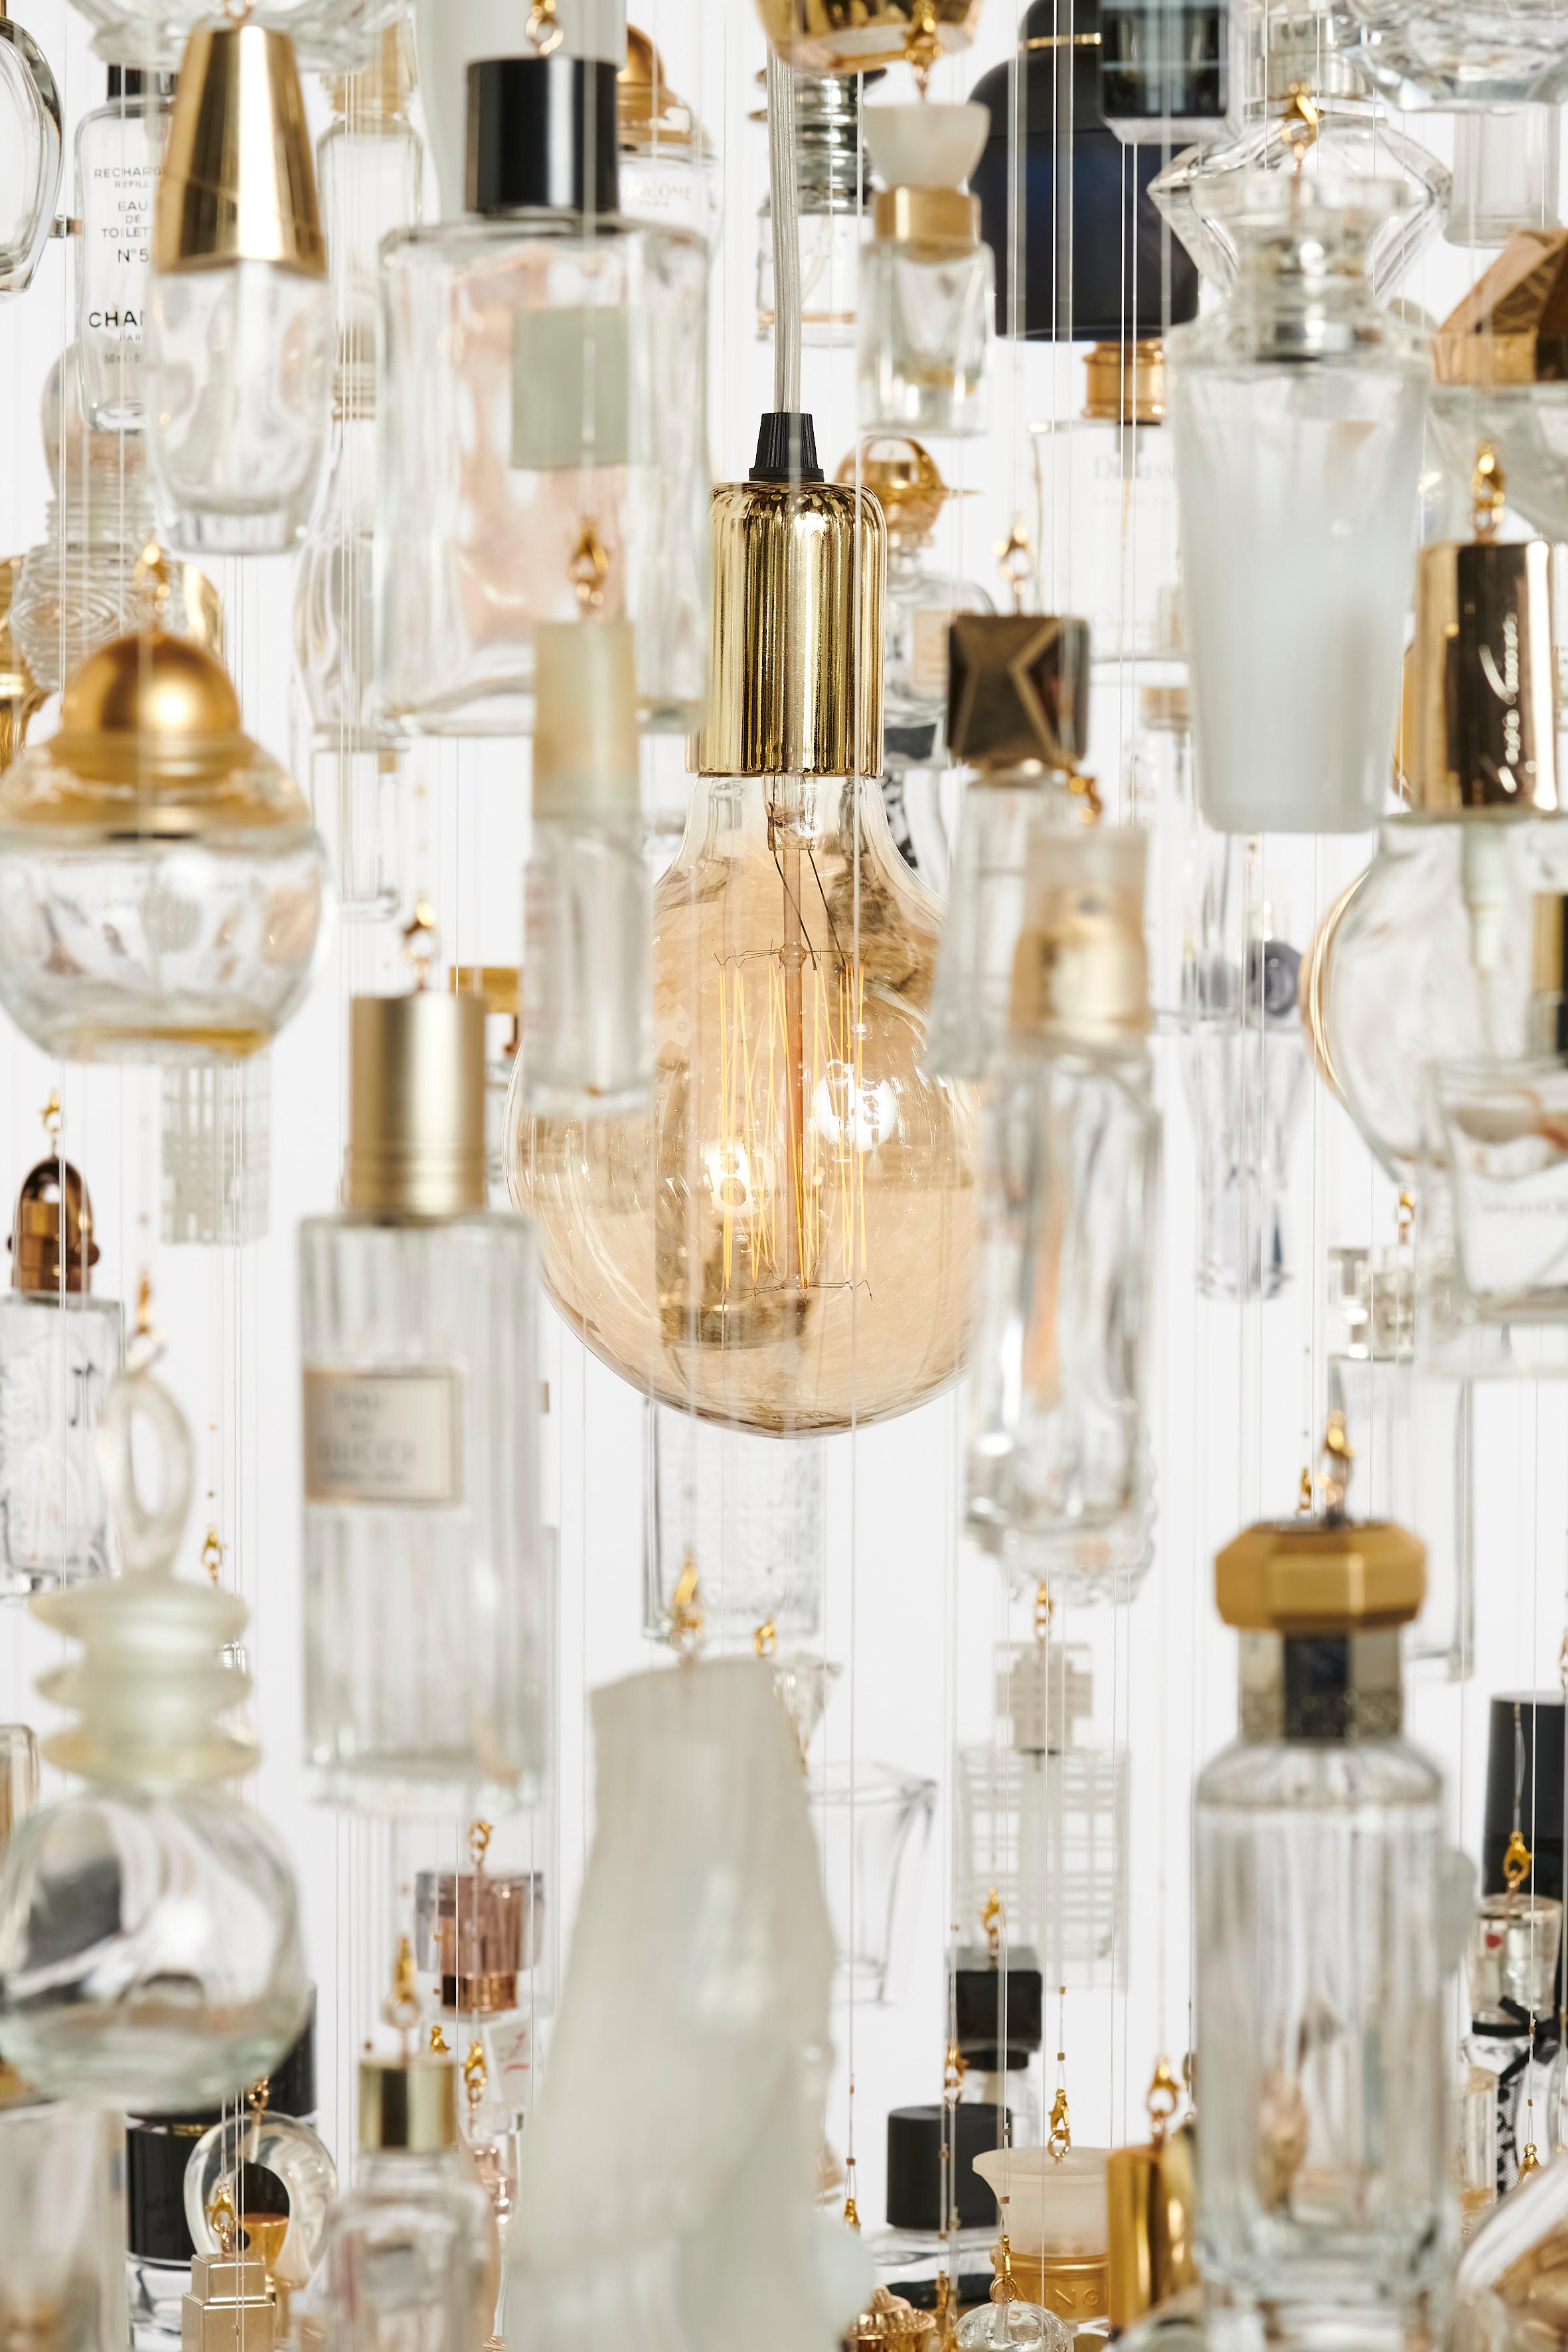 A drop of essence 85 gold. A chandelier made from personal collections of perfume bottles. ‘Cherished’ is Diederik Schneemann’s latest project revolving around the concept of collecting. In search of new interesting materials to work with,